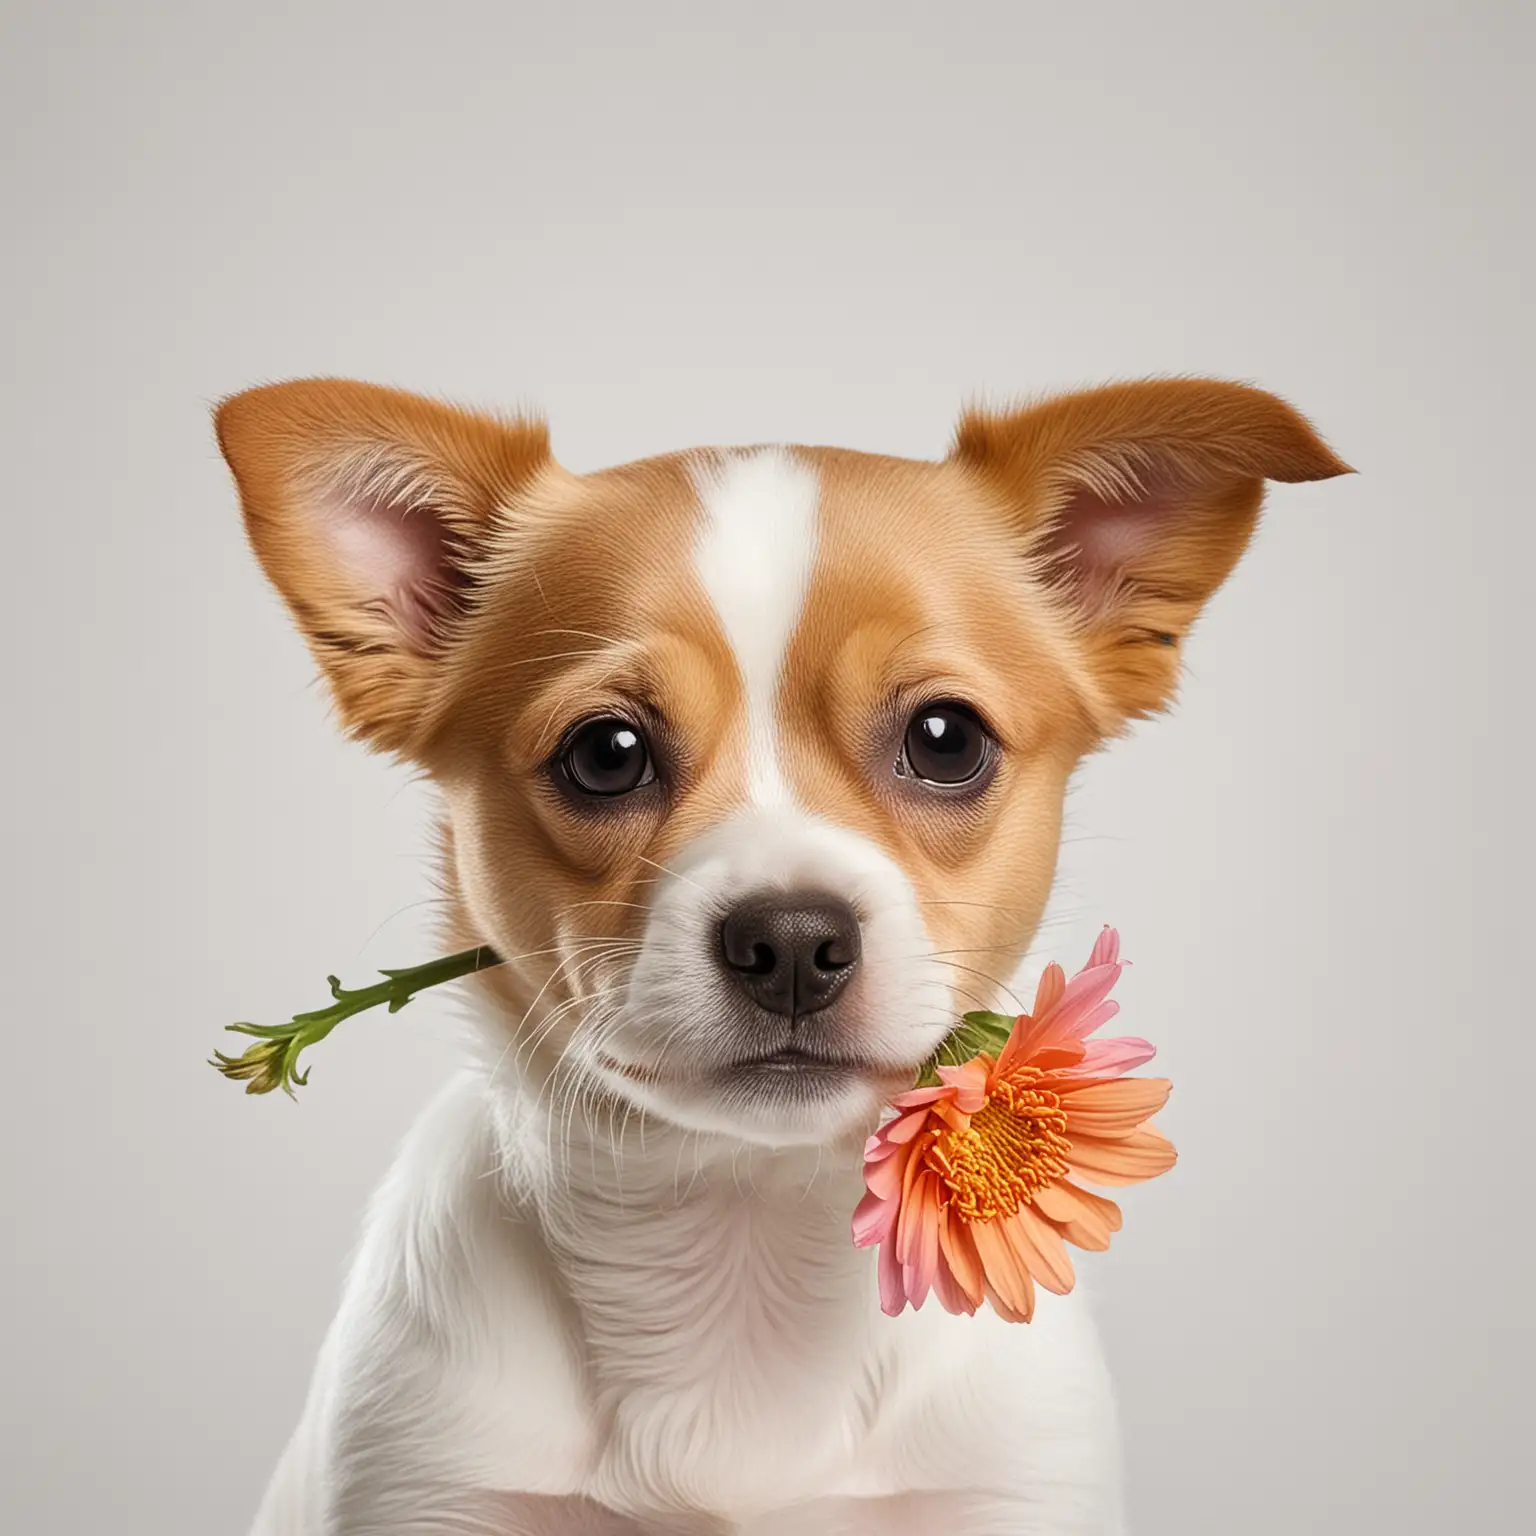 Cute Dog with Flower in Mouth on White Background